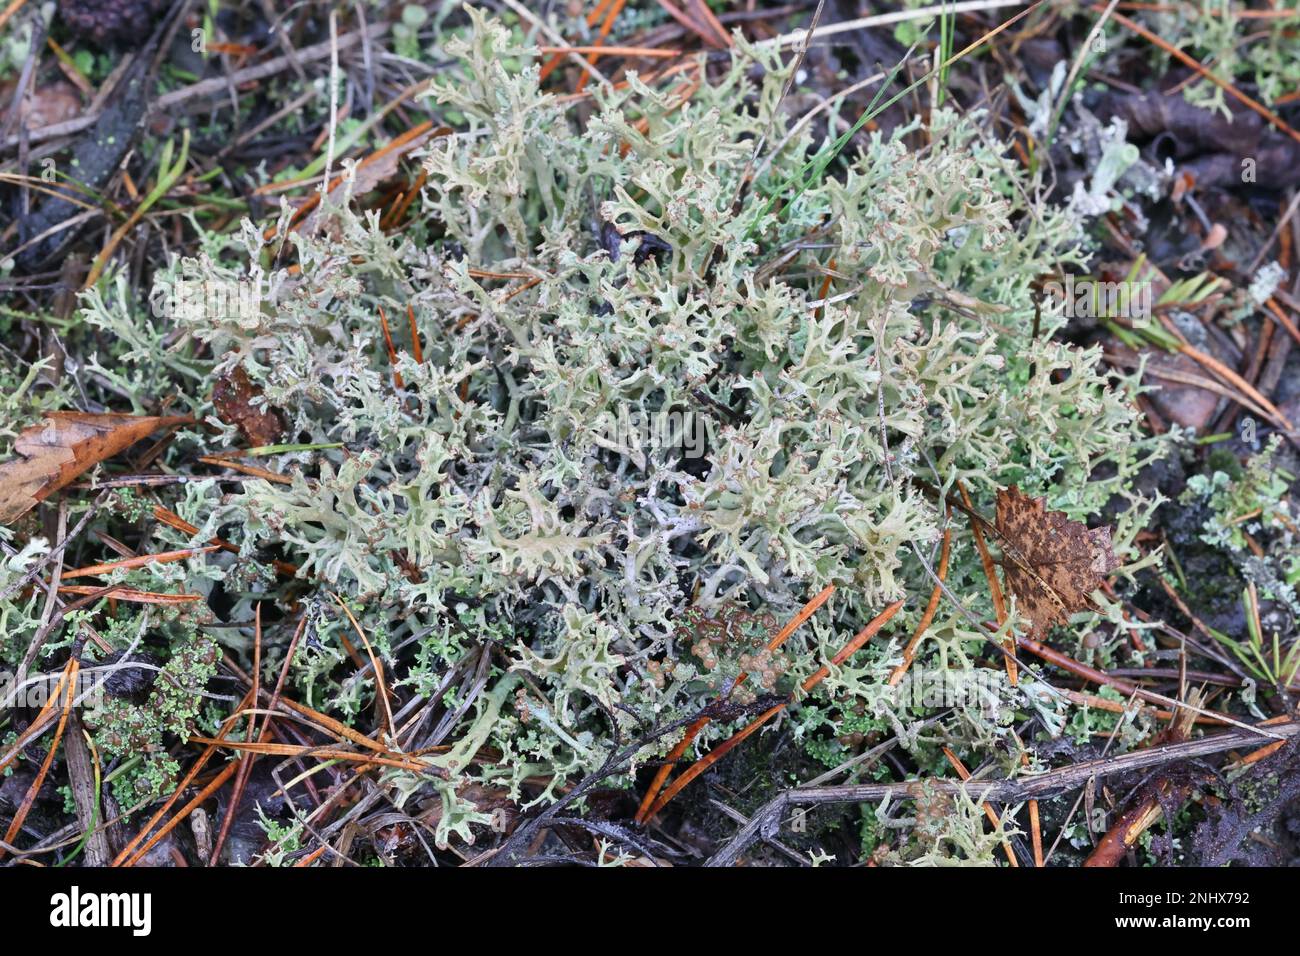 Cladonia crispata, commonly known as organ-pipe lichen, cup-bearing lichens from Finland Stock Photo